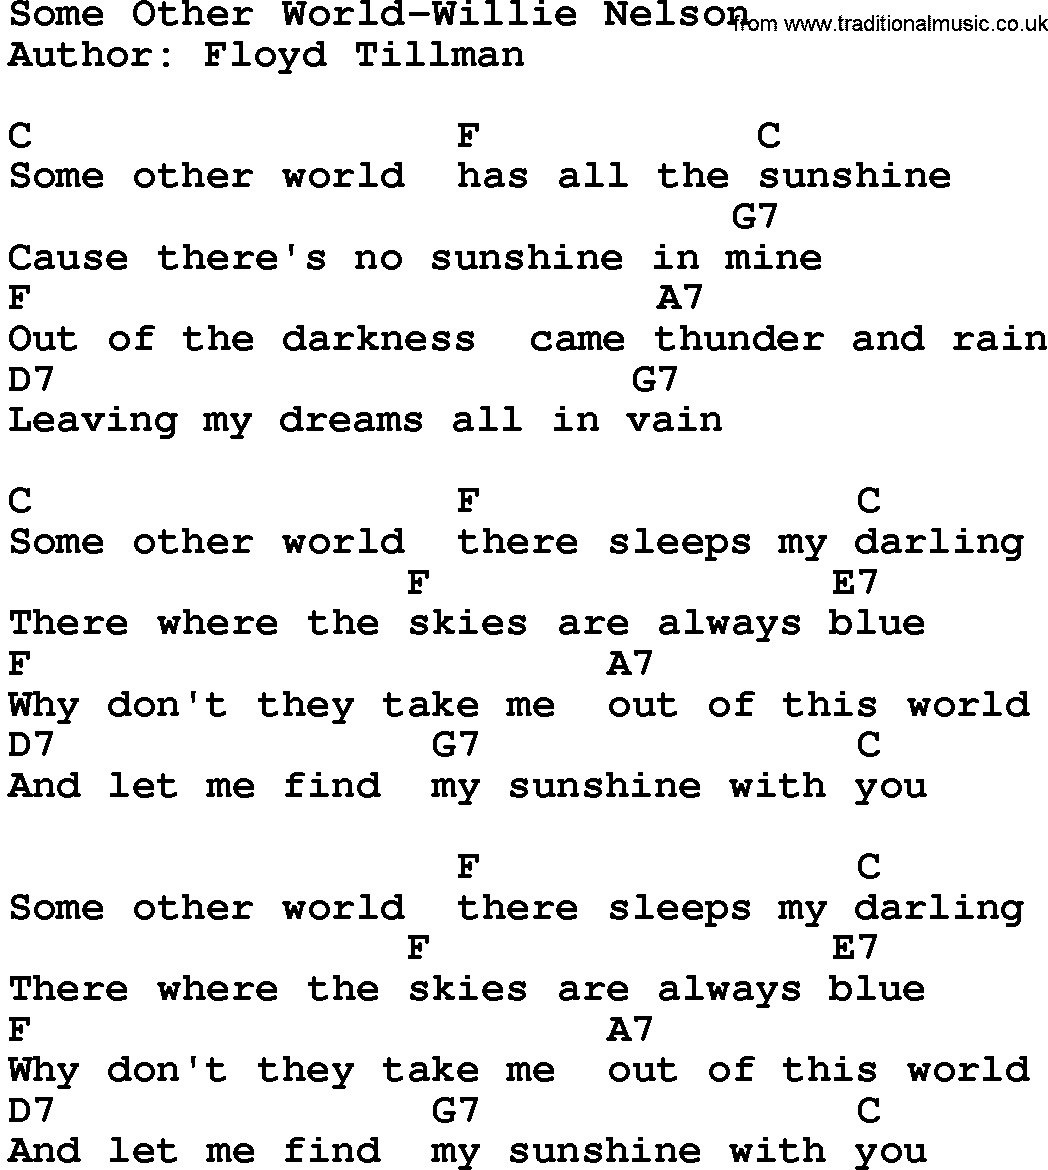 Country music song: Some Other World-Willie Nelson lyrics and chords